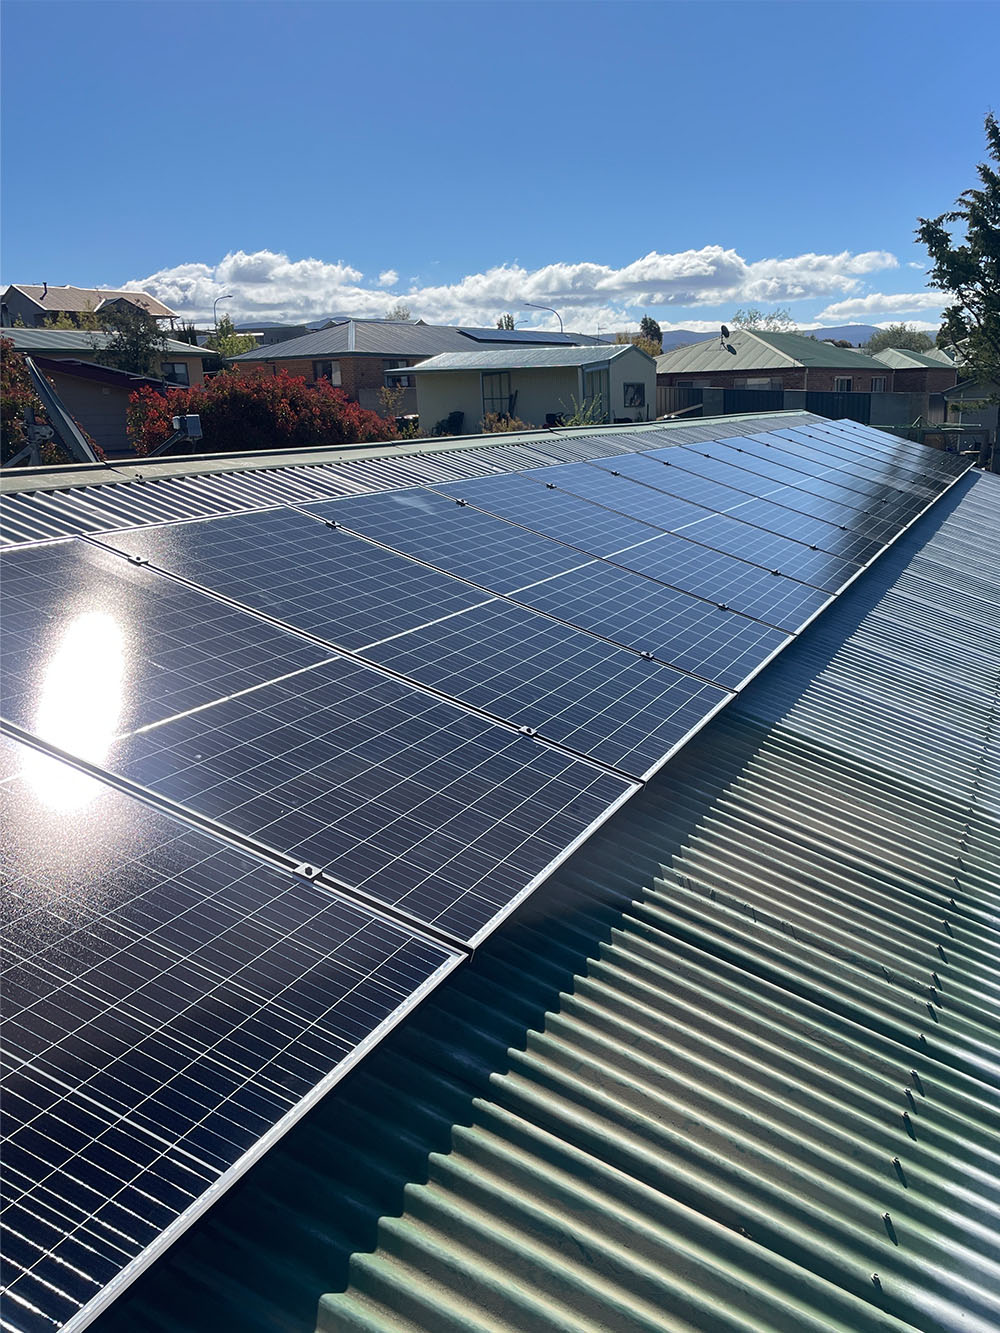 View from the roof of a Solar panel installation in Jindabyne